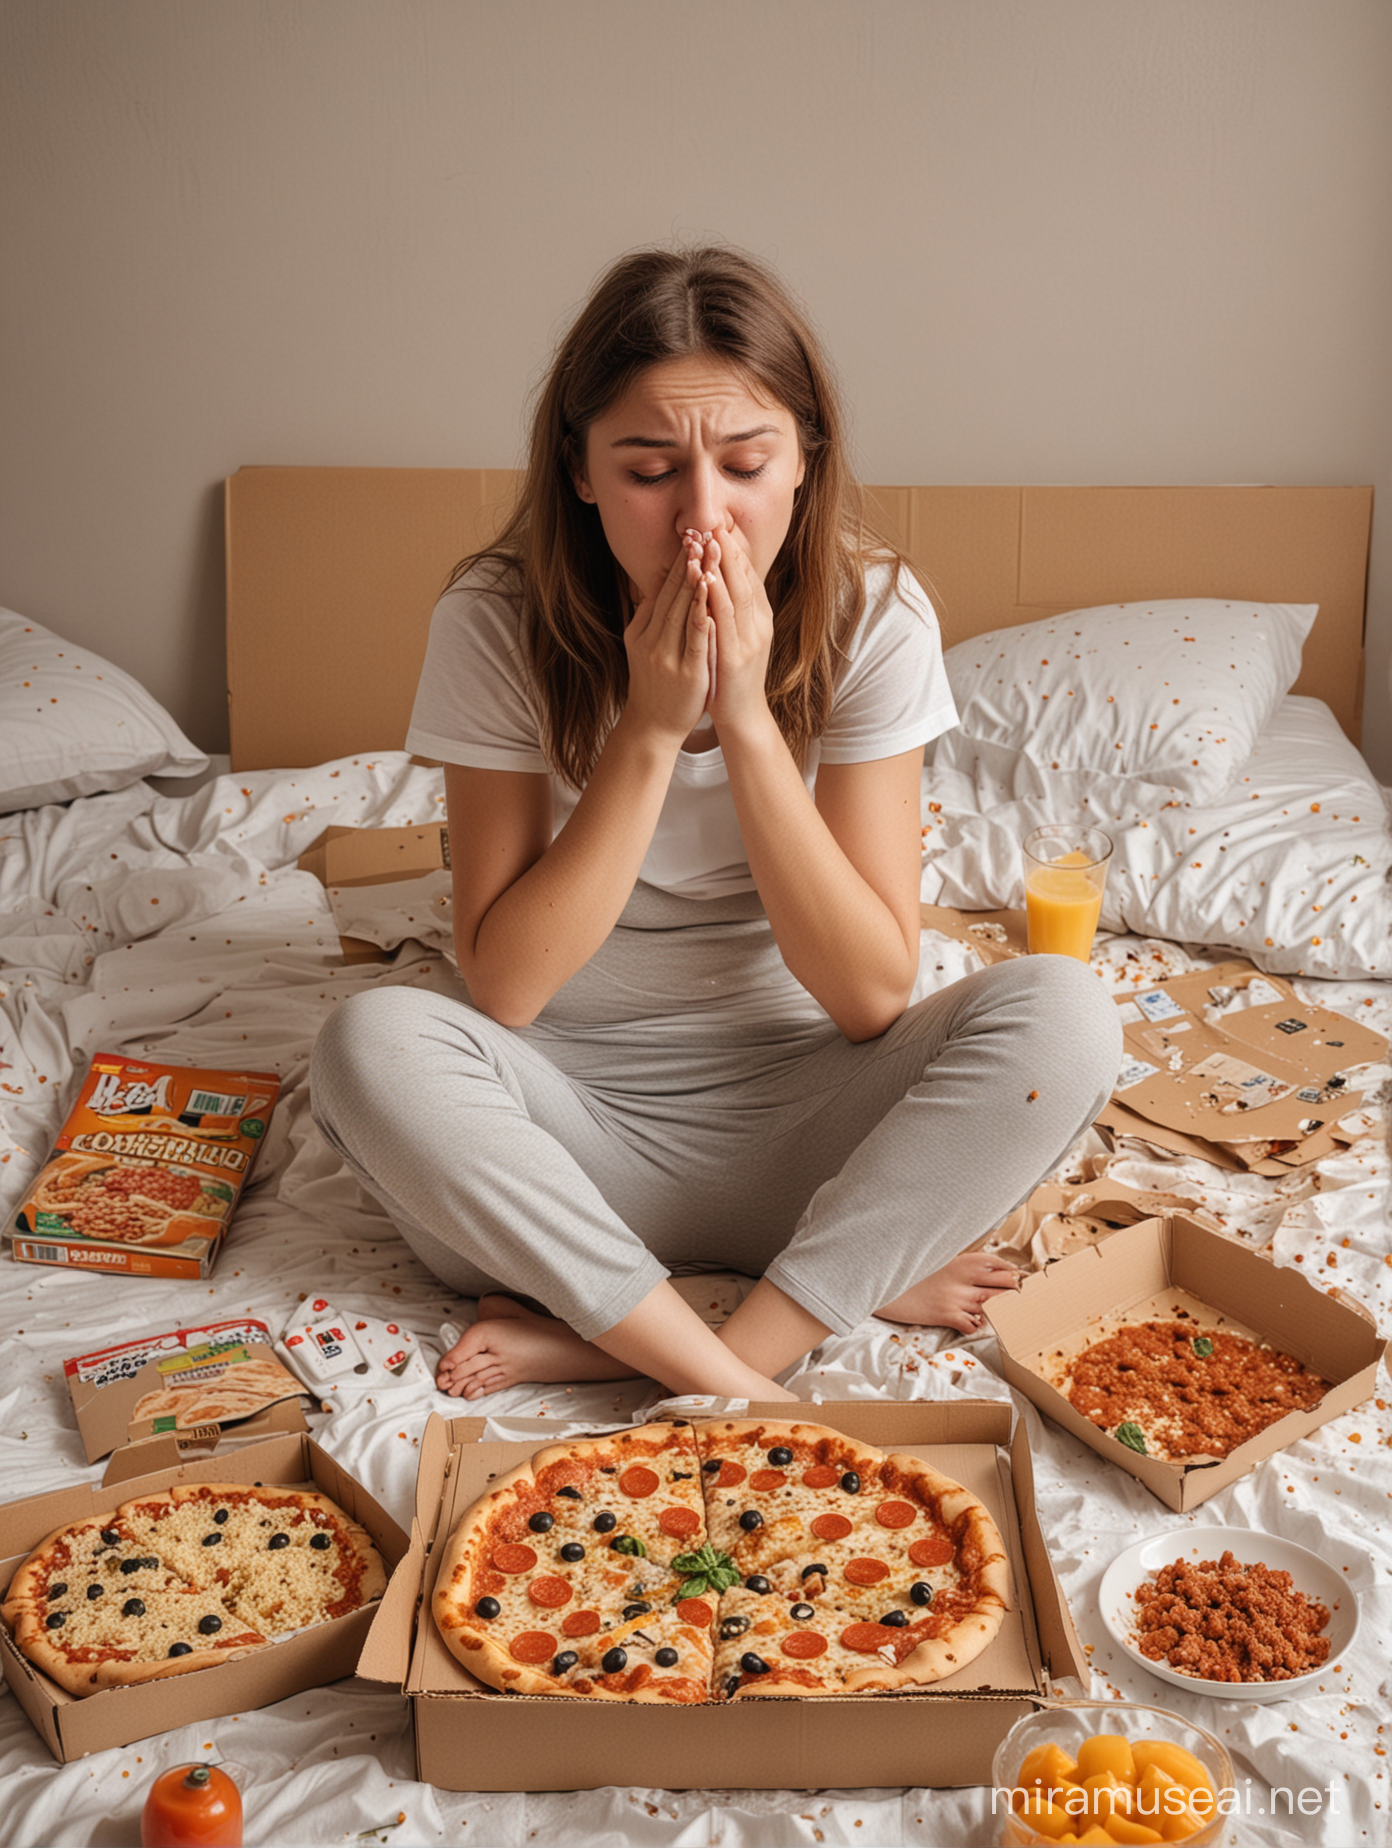 girl sitting in bed with her head in her knees crying, partly coved by the sheets and surrounded with food crumbs, a pizza box, juice cartons and plates with finished food